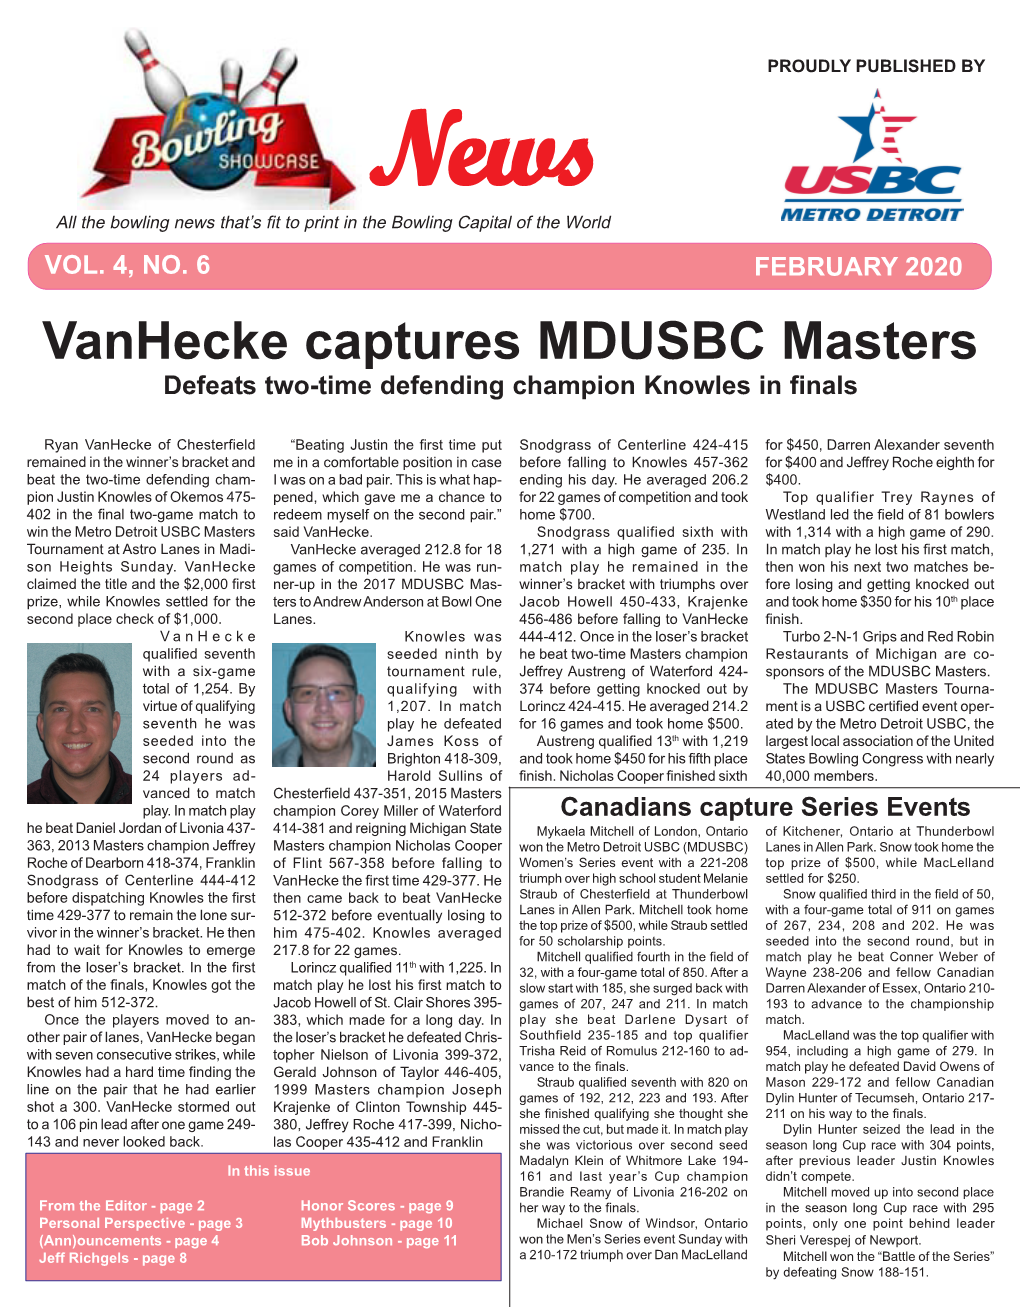 FEBRUARY 2020 Vanhecke Captures MDUSBC Masters Defeats Two-Time Defending Champion Knowles in Finals